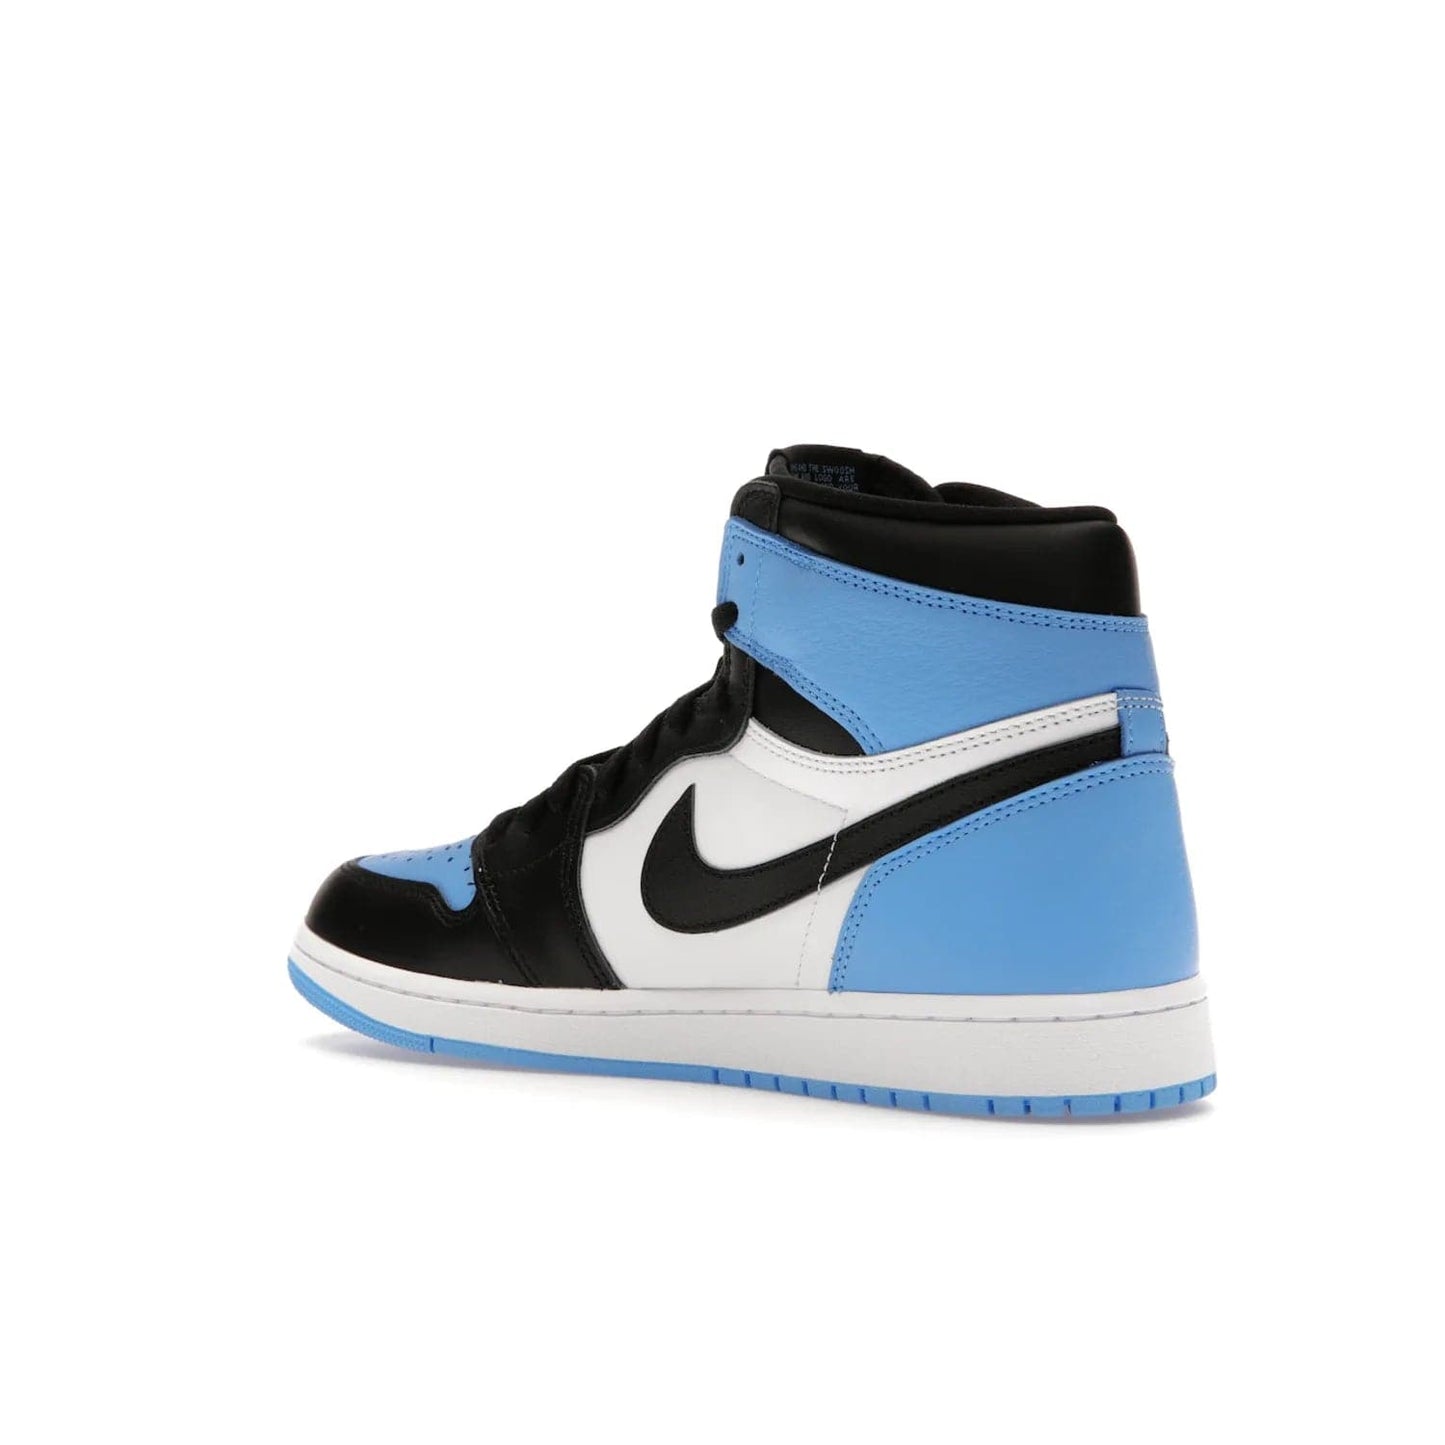 Jordan 1 Retro High OG UNC Toe - Image 23 - Only at www.BallersClubKickz.com - Jordan 1 High OG UNC Toe is a fashionable, high-quality sneaker featuring University Blue, Black White and White. Releasing July 22, 2023, it's the perfect pick up for sneakerheads.